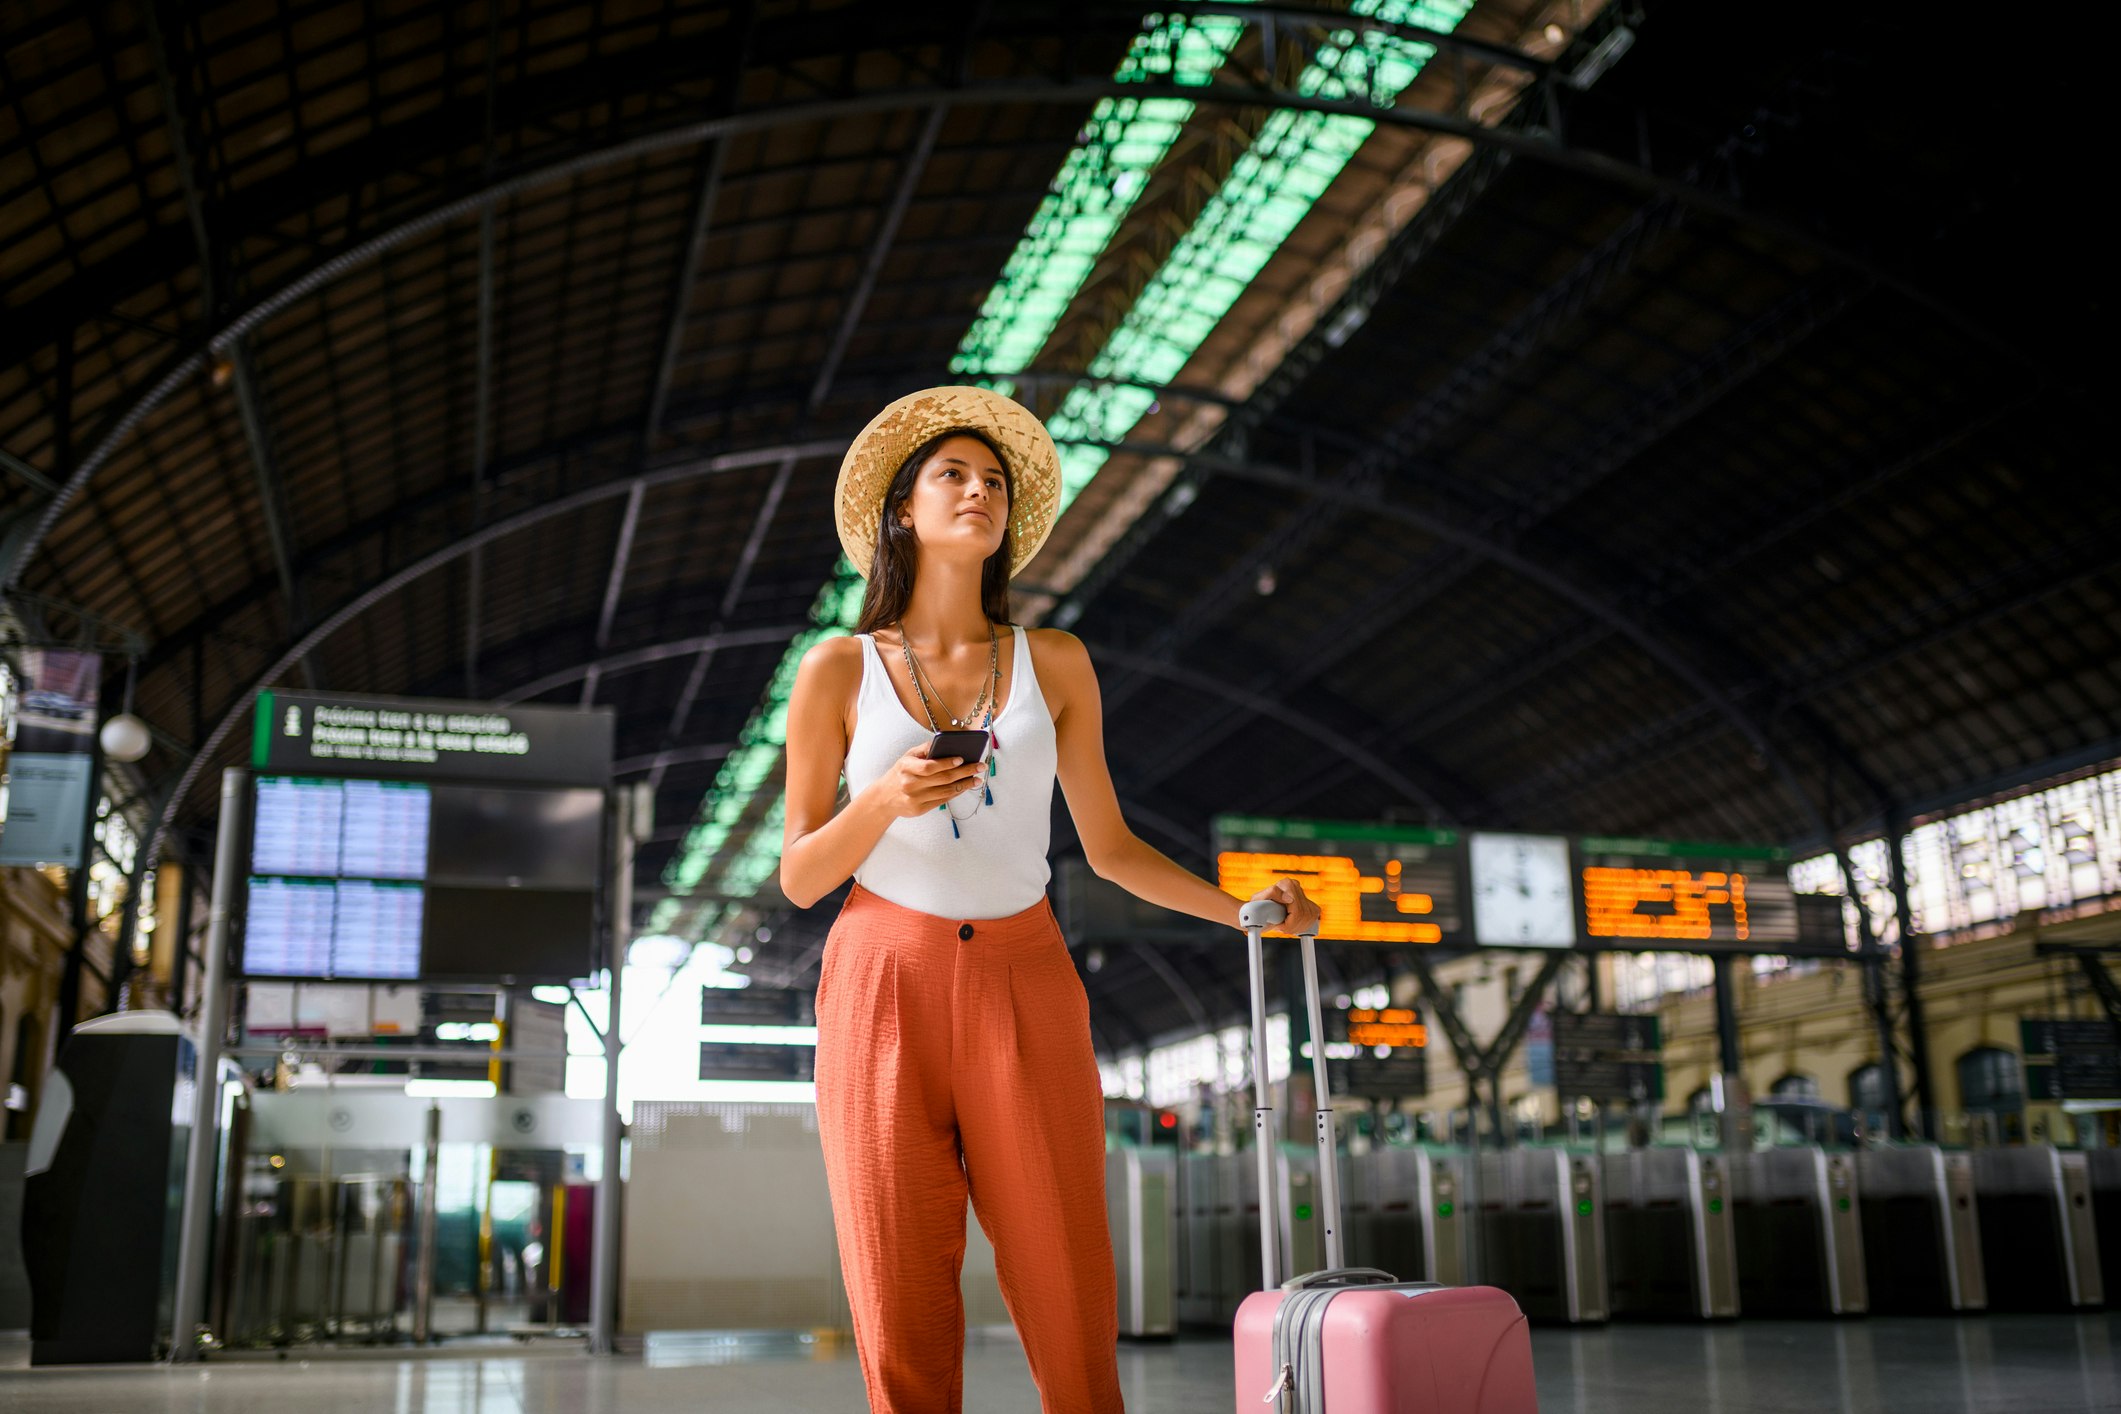 Young woman in train station.jpg